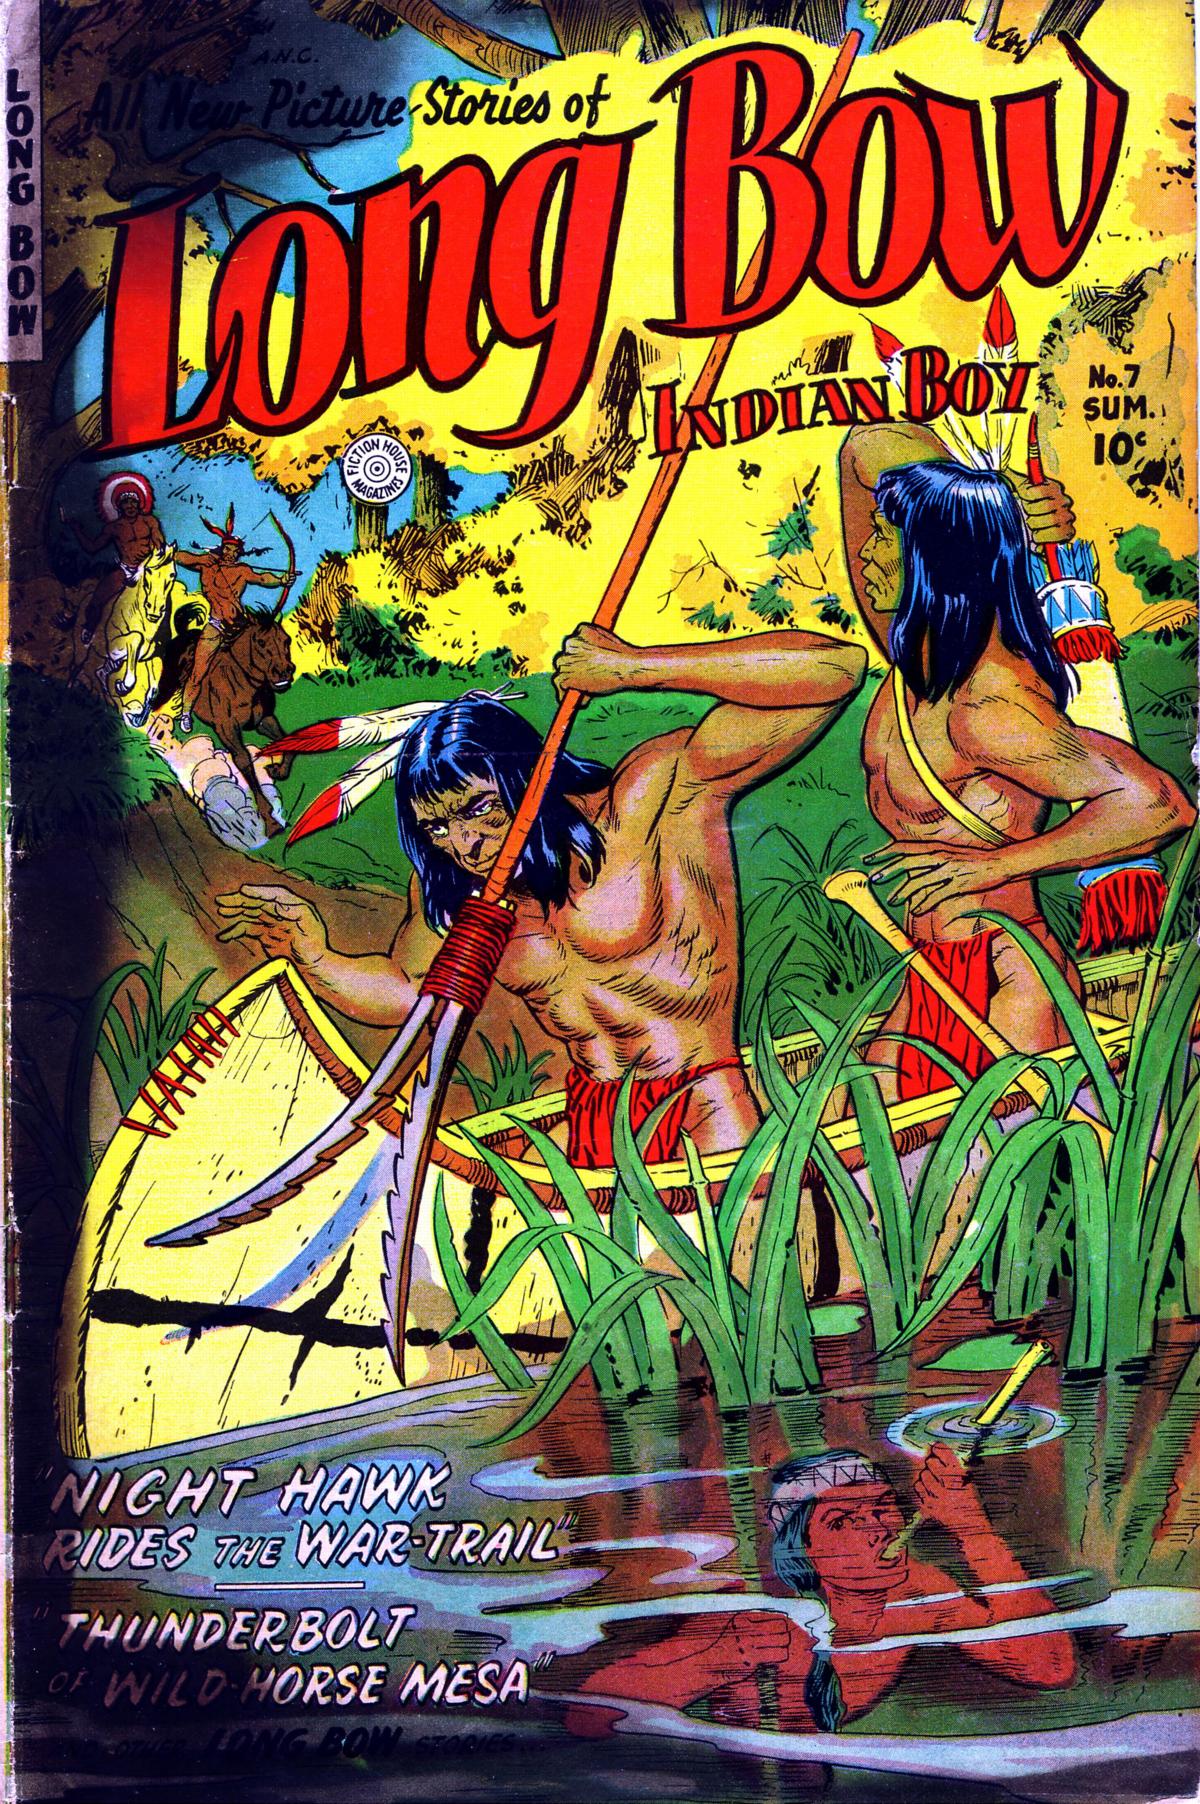 Read online Long Bow comic -  Issue #7 - 1